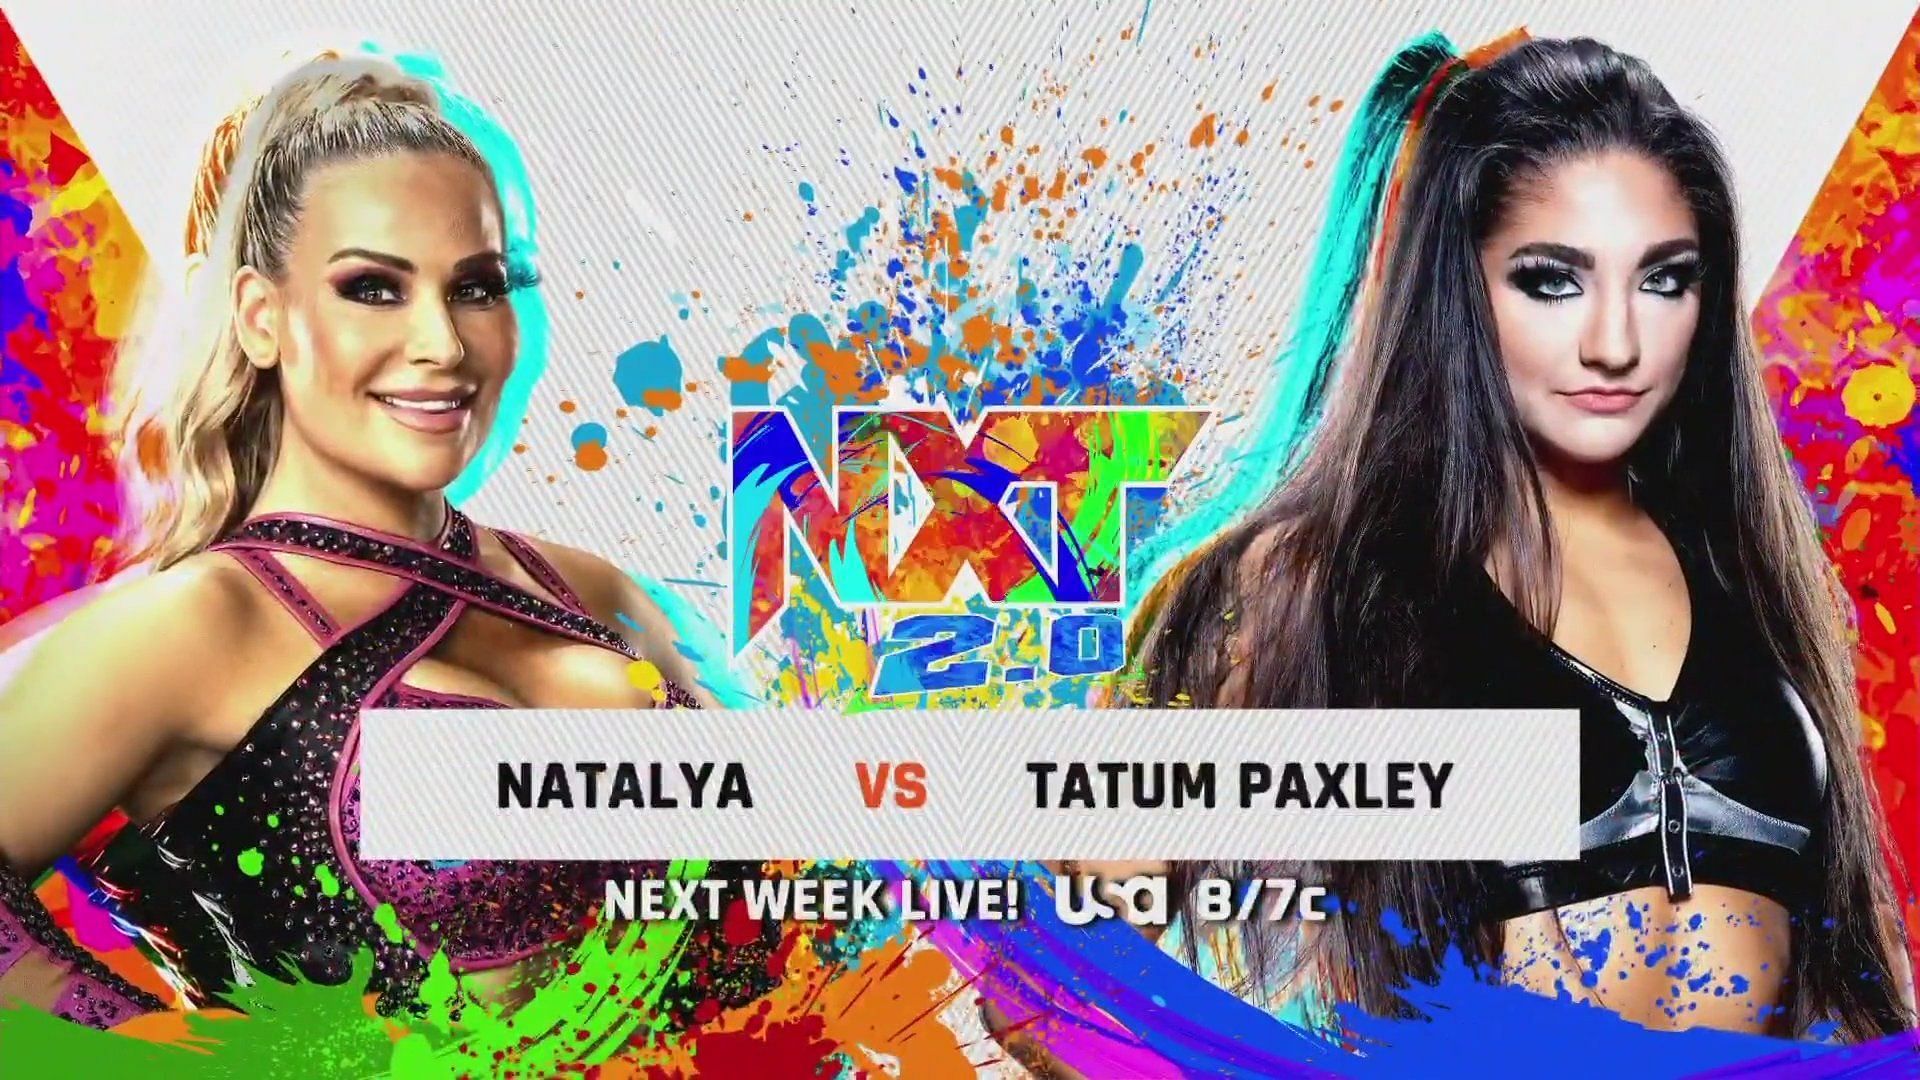 Tatum Paxley was one of the newer stars who challenged Natalya earlier this year